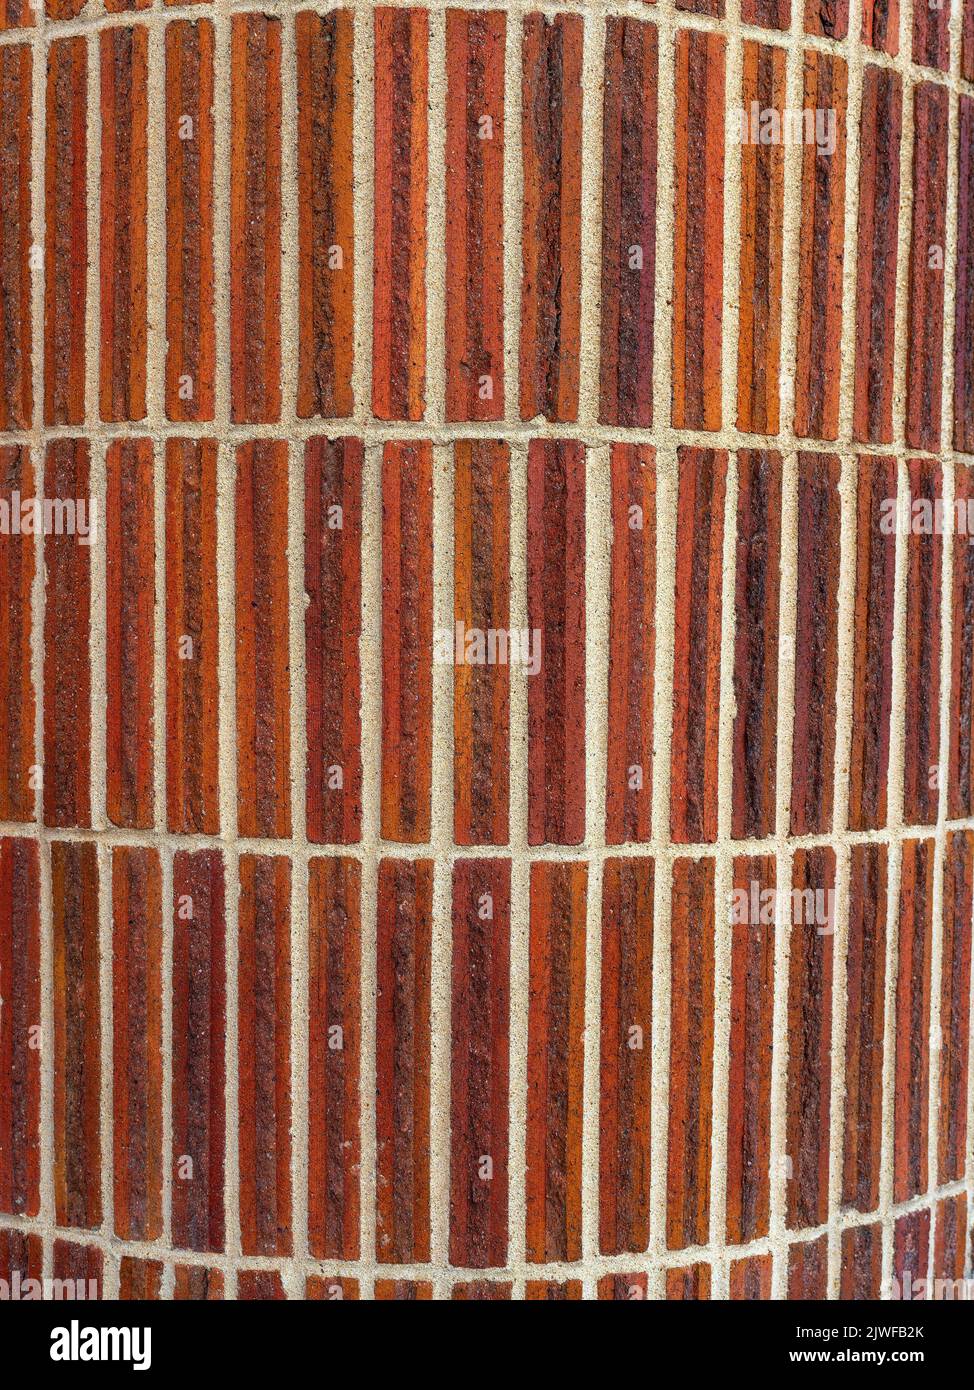 Bricks with mortar on a curved wall background abstract Stock Photo